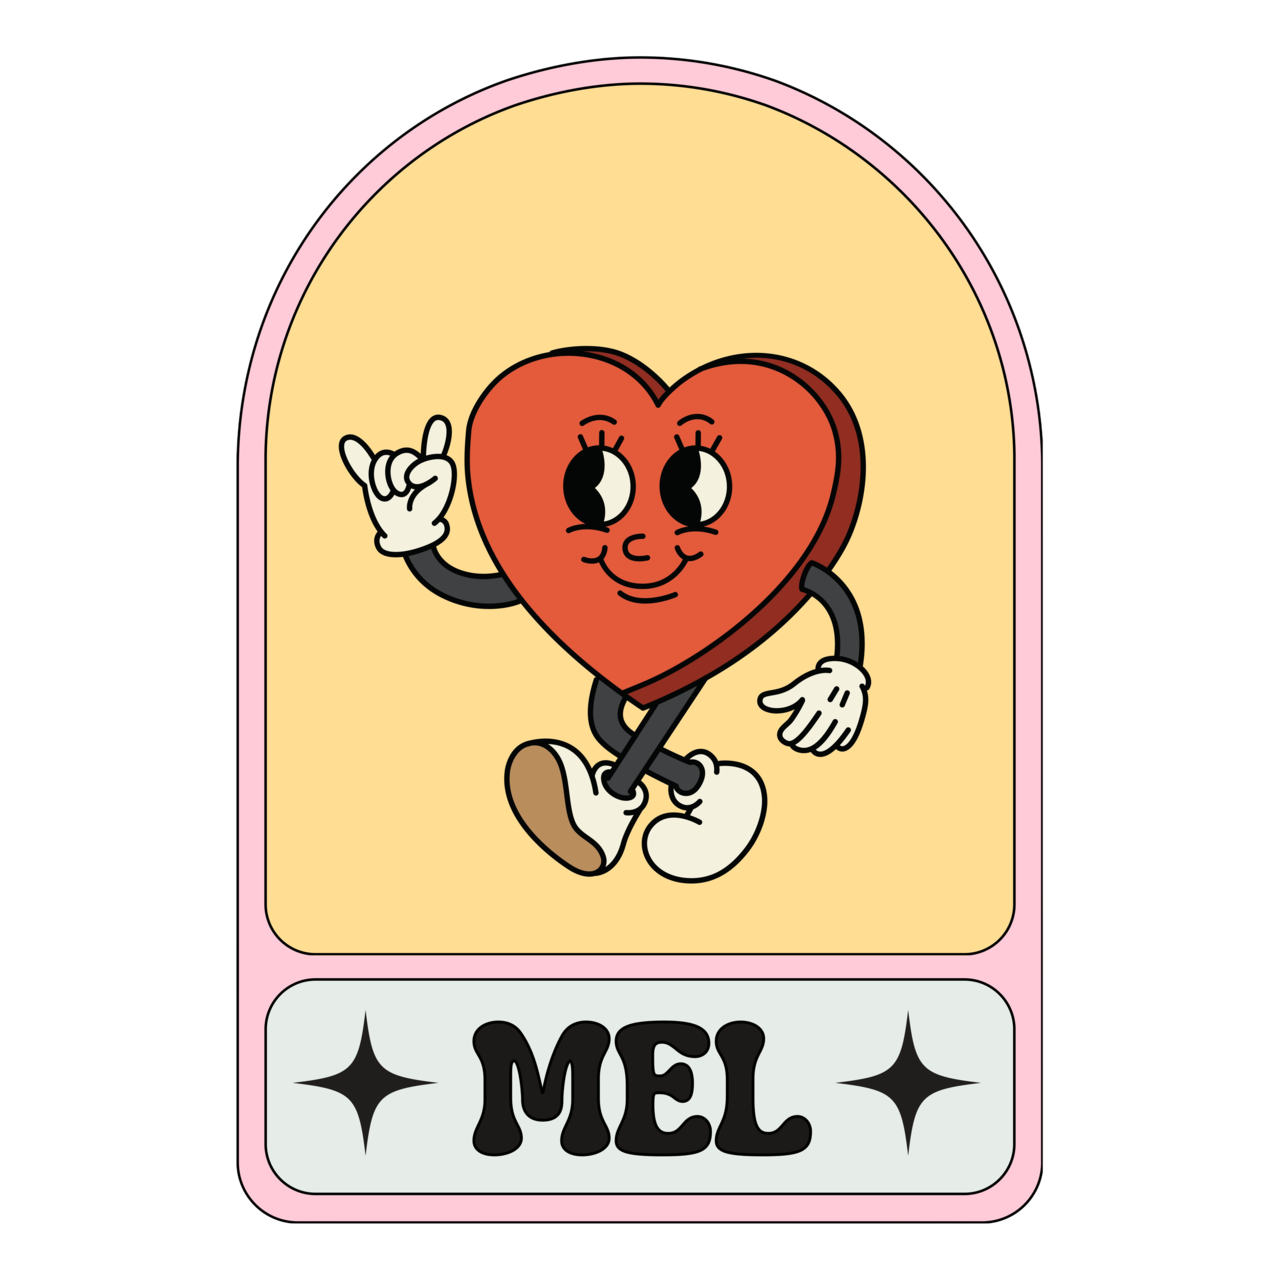 With Love, Mel